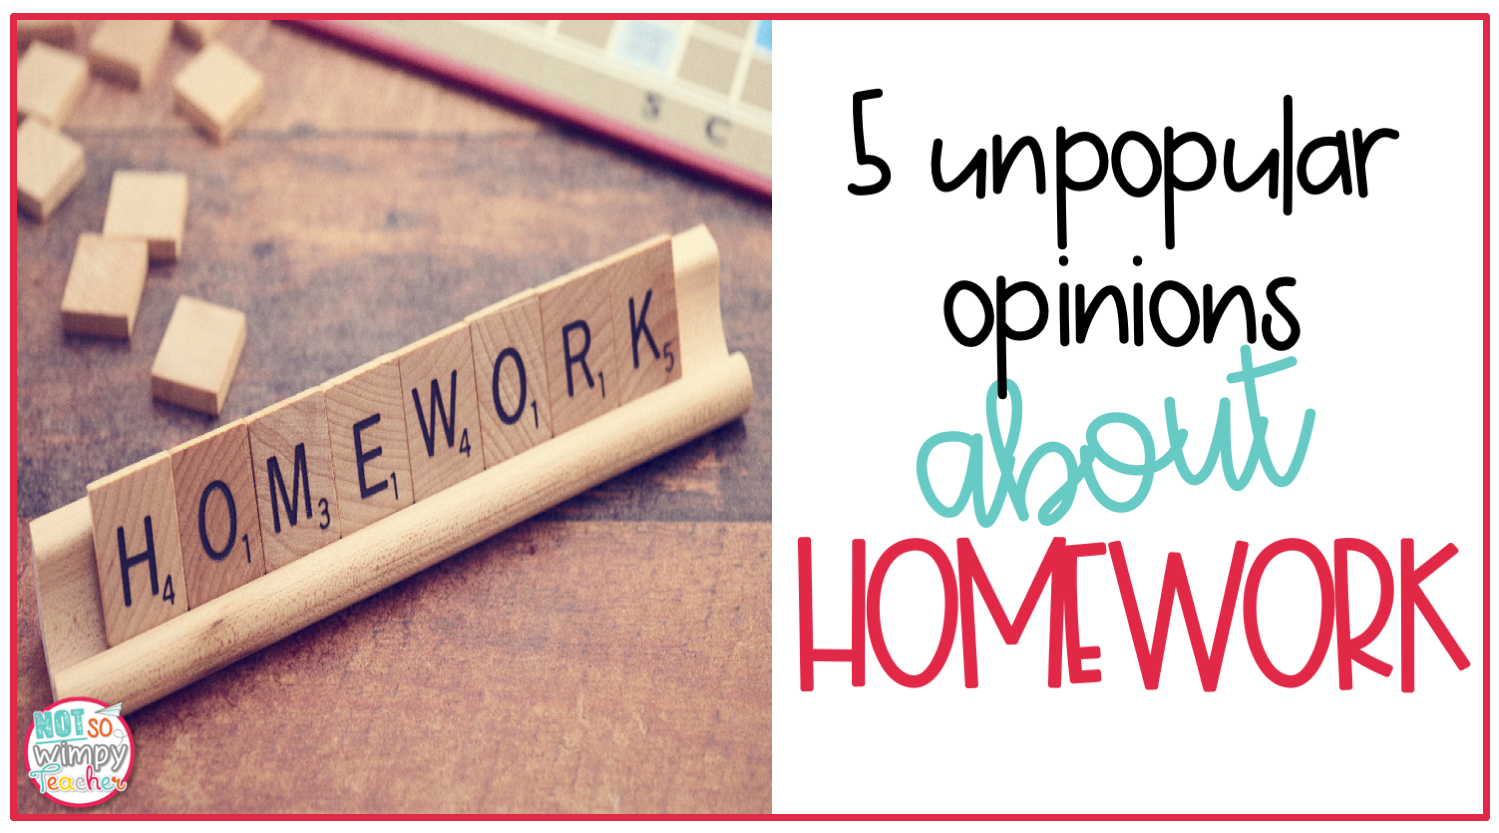 what is your opinion about homework